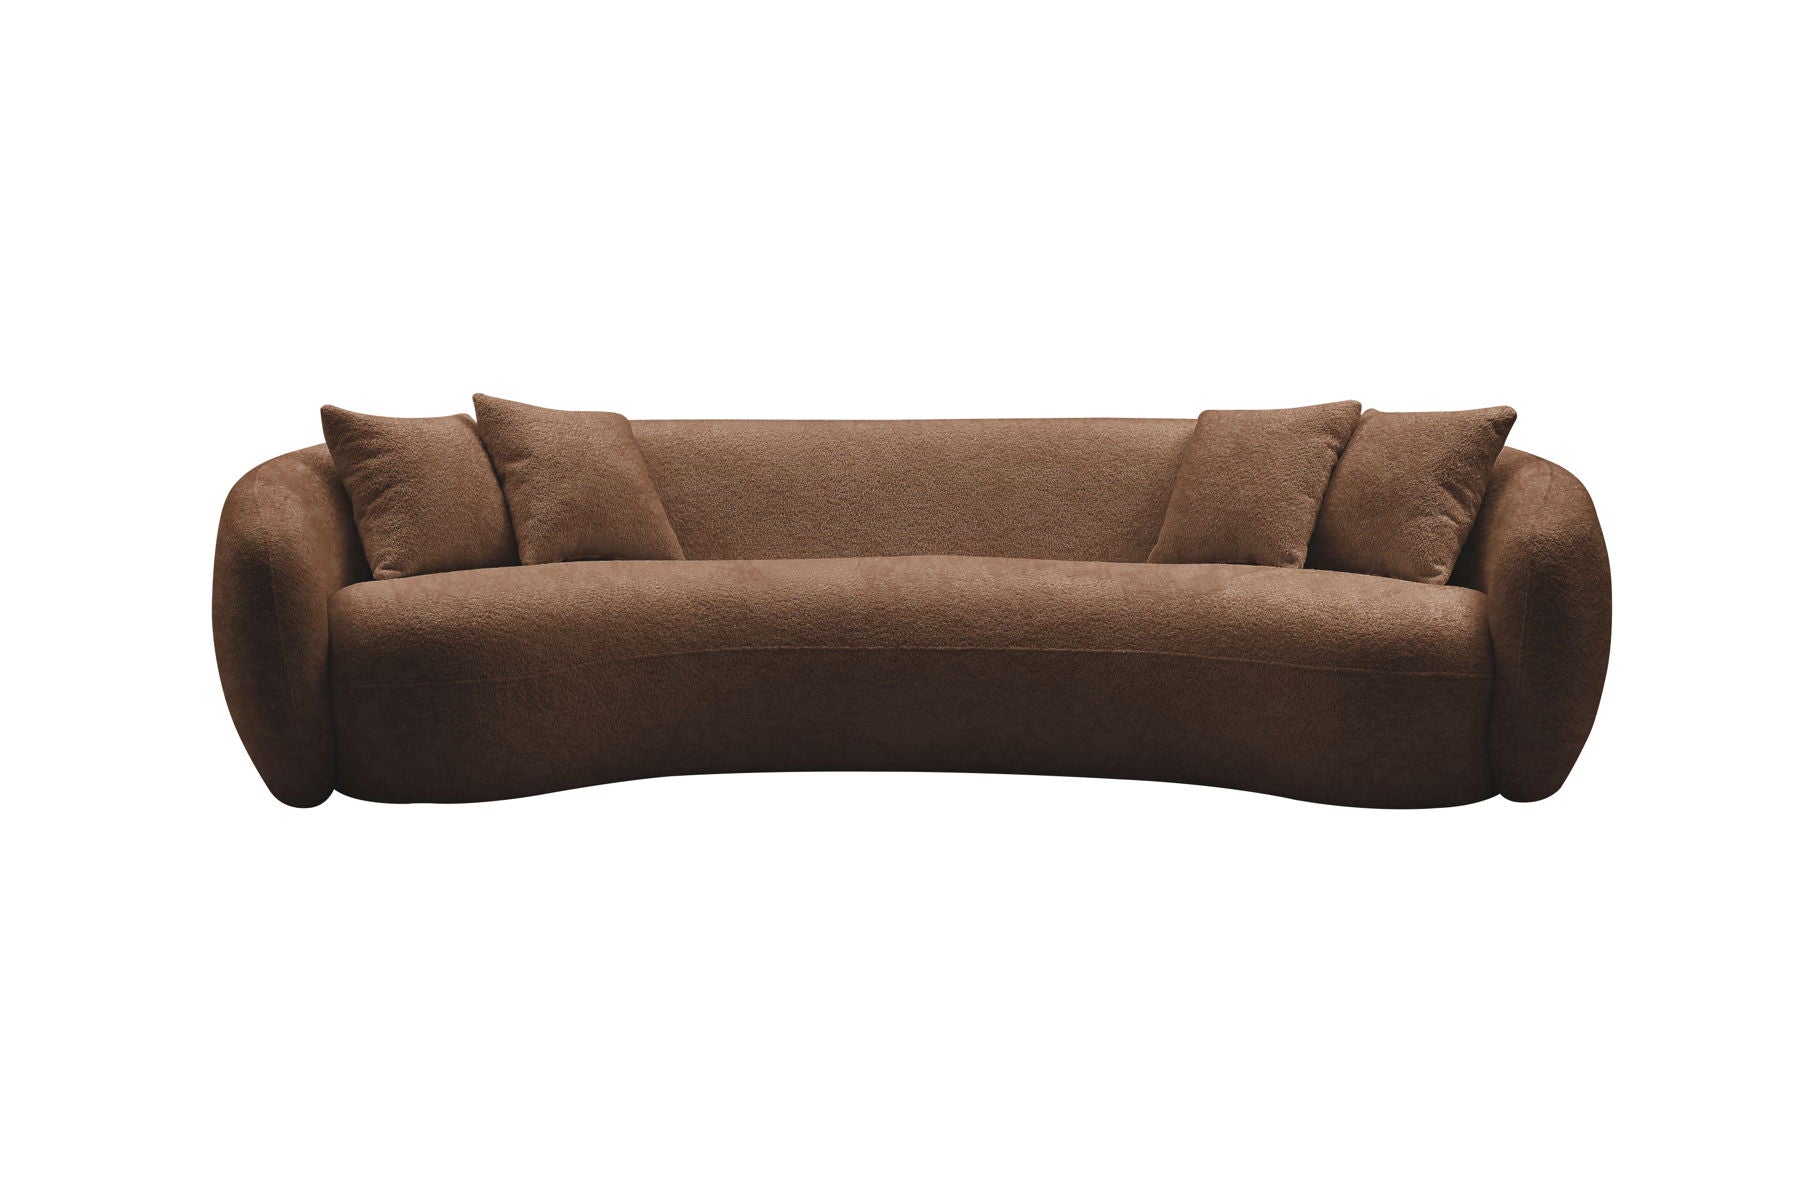 5 - Seater Boucle Sofa Modern Sectional Half Moon Leisure Couch Curved Sofa Teddy Fleece Brown